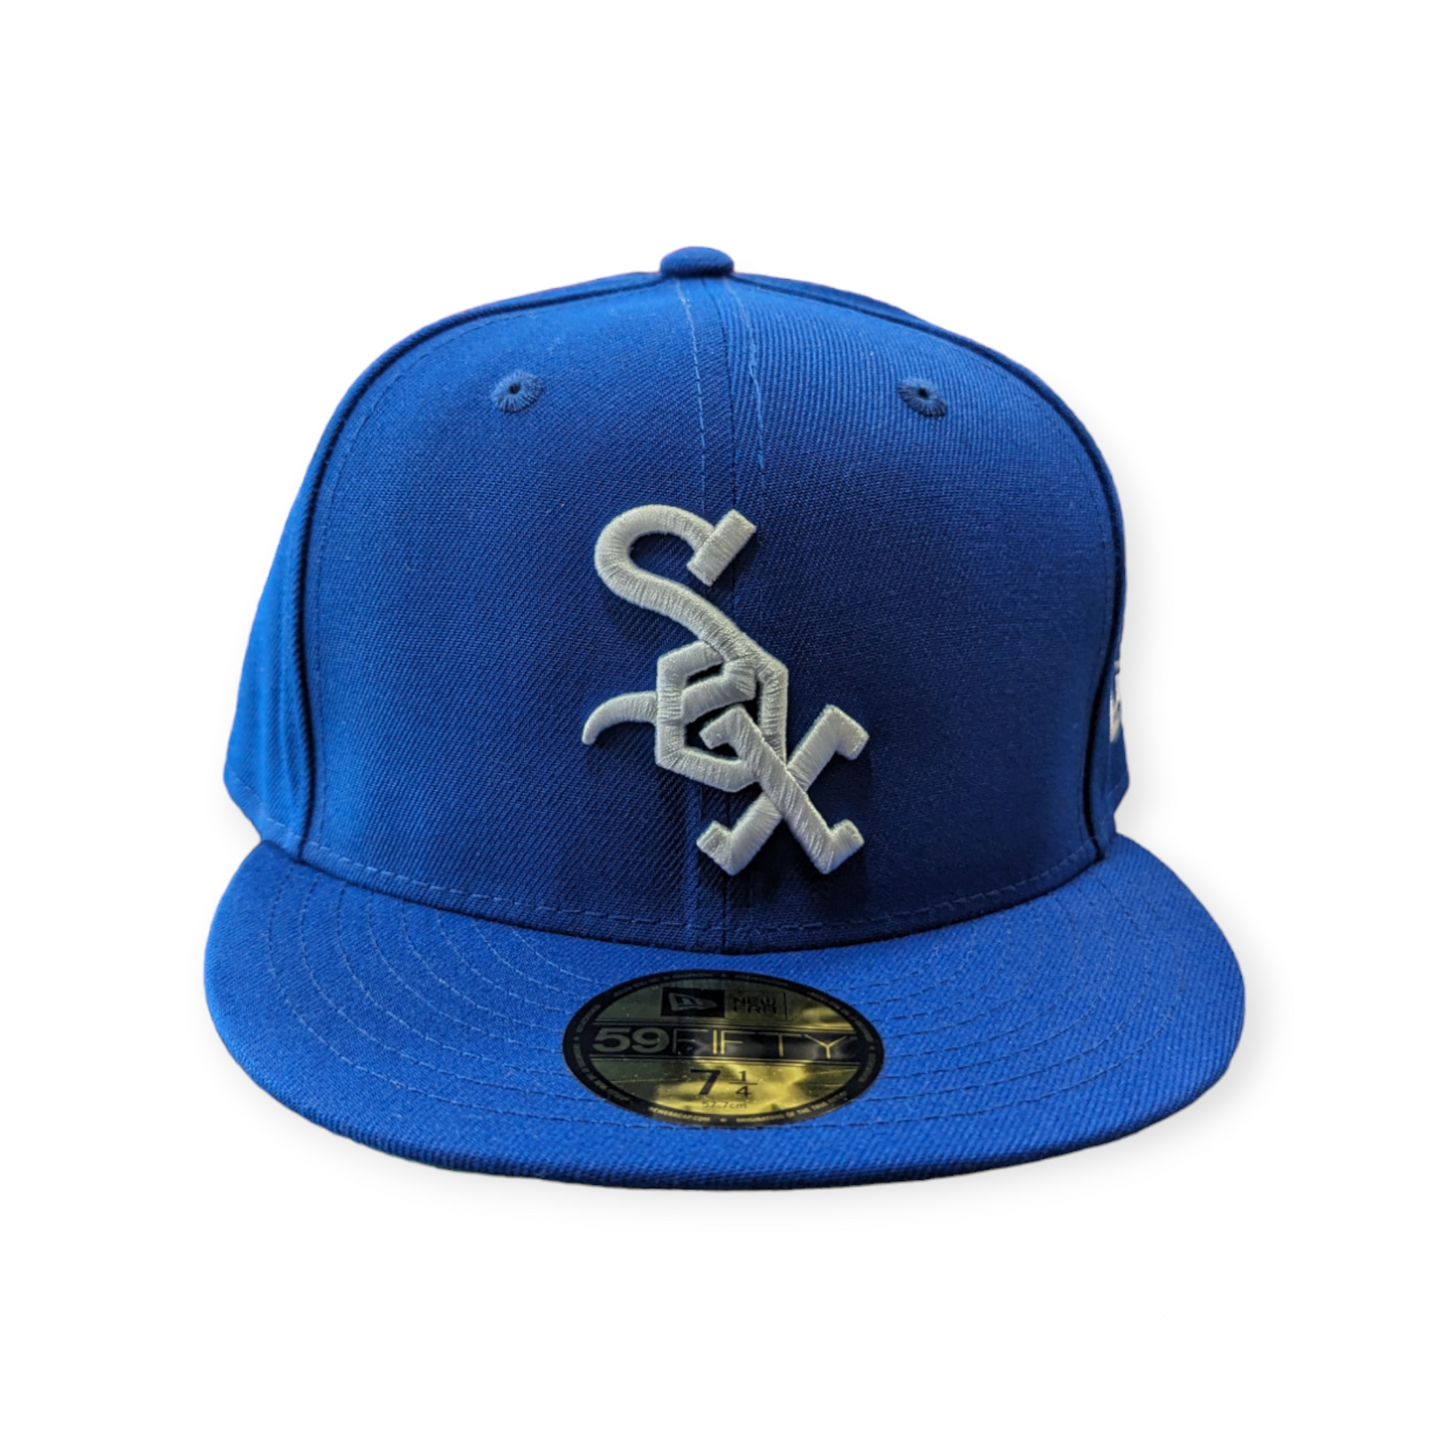 Chicago White Sox  1969 New Era Cooperstown Classics Royal Blue 59FIFTY Fitted Hat